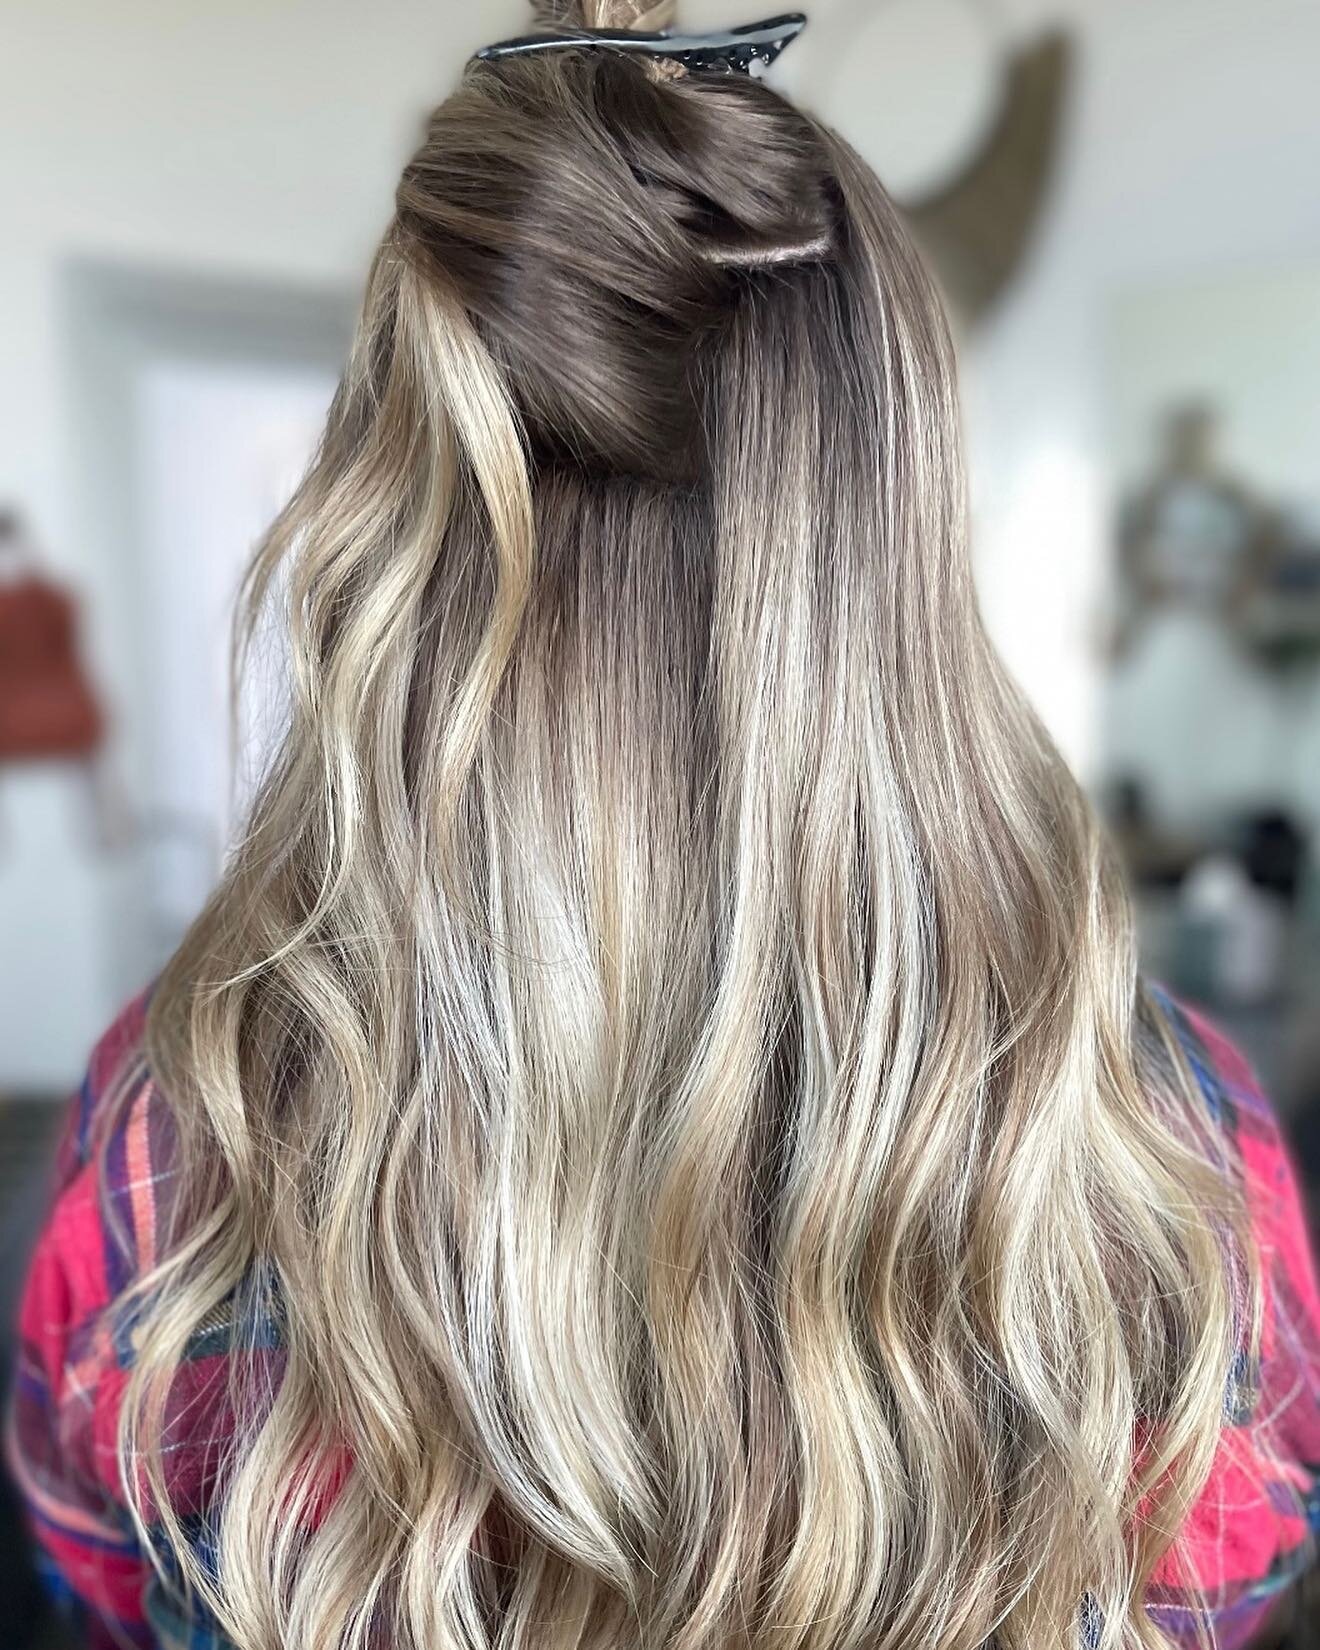 2 rows&hellip;. exposed 📸.
.
.
.
@invisiblebeadextensions 
#ibeextensions #invisiblebeadextensions #ibestylist #handtiedextensions #siouxfalls #siouxfallssalon #siouxfallshair #siouxfallsextensions #siouxfallshairextensions #ibesiouxfalls #ibesouthd